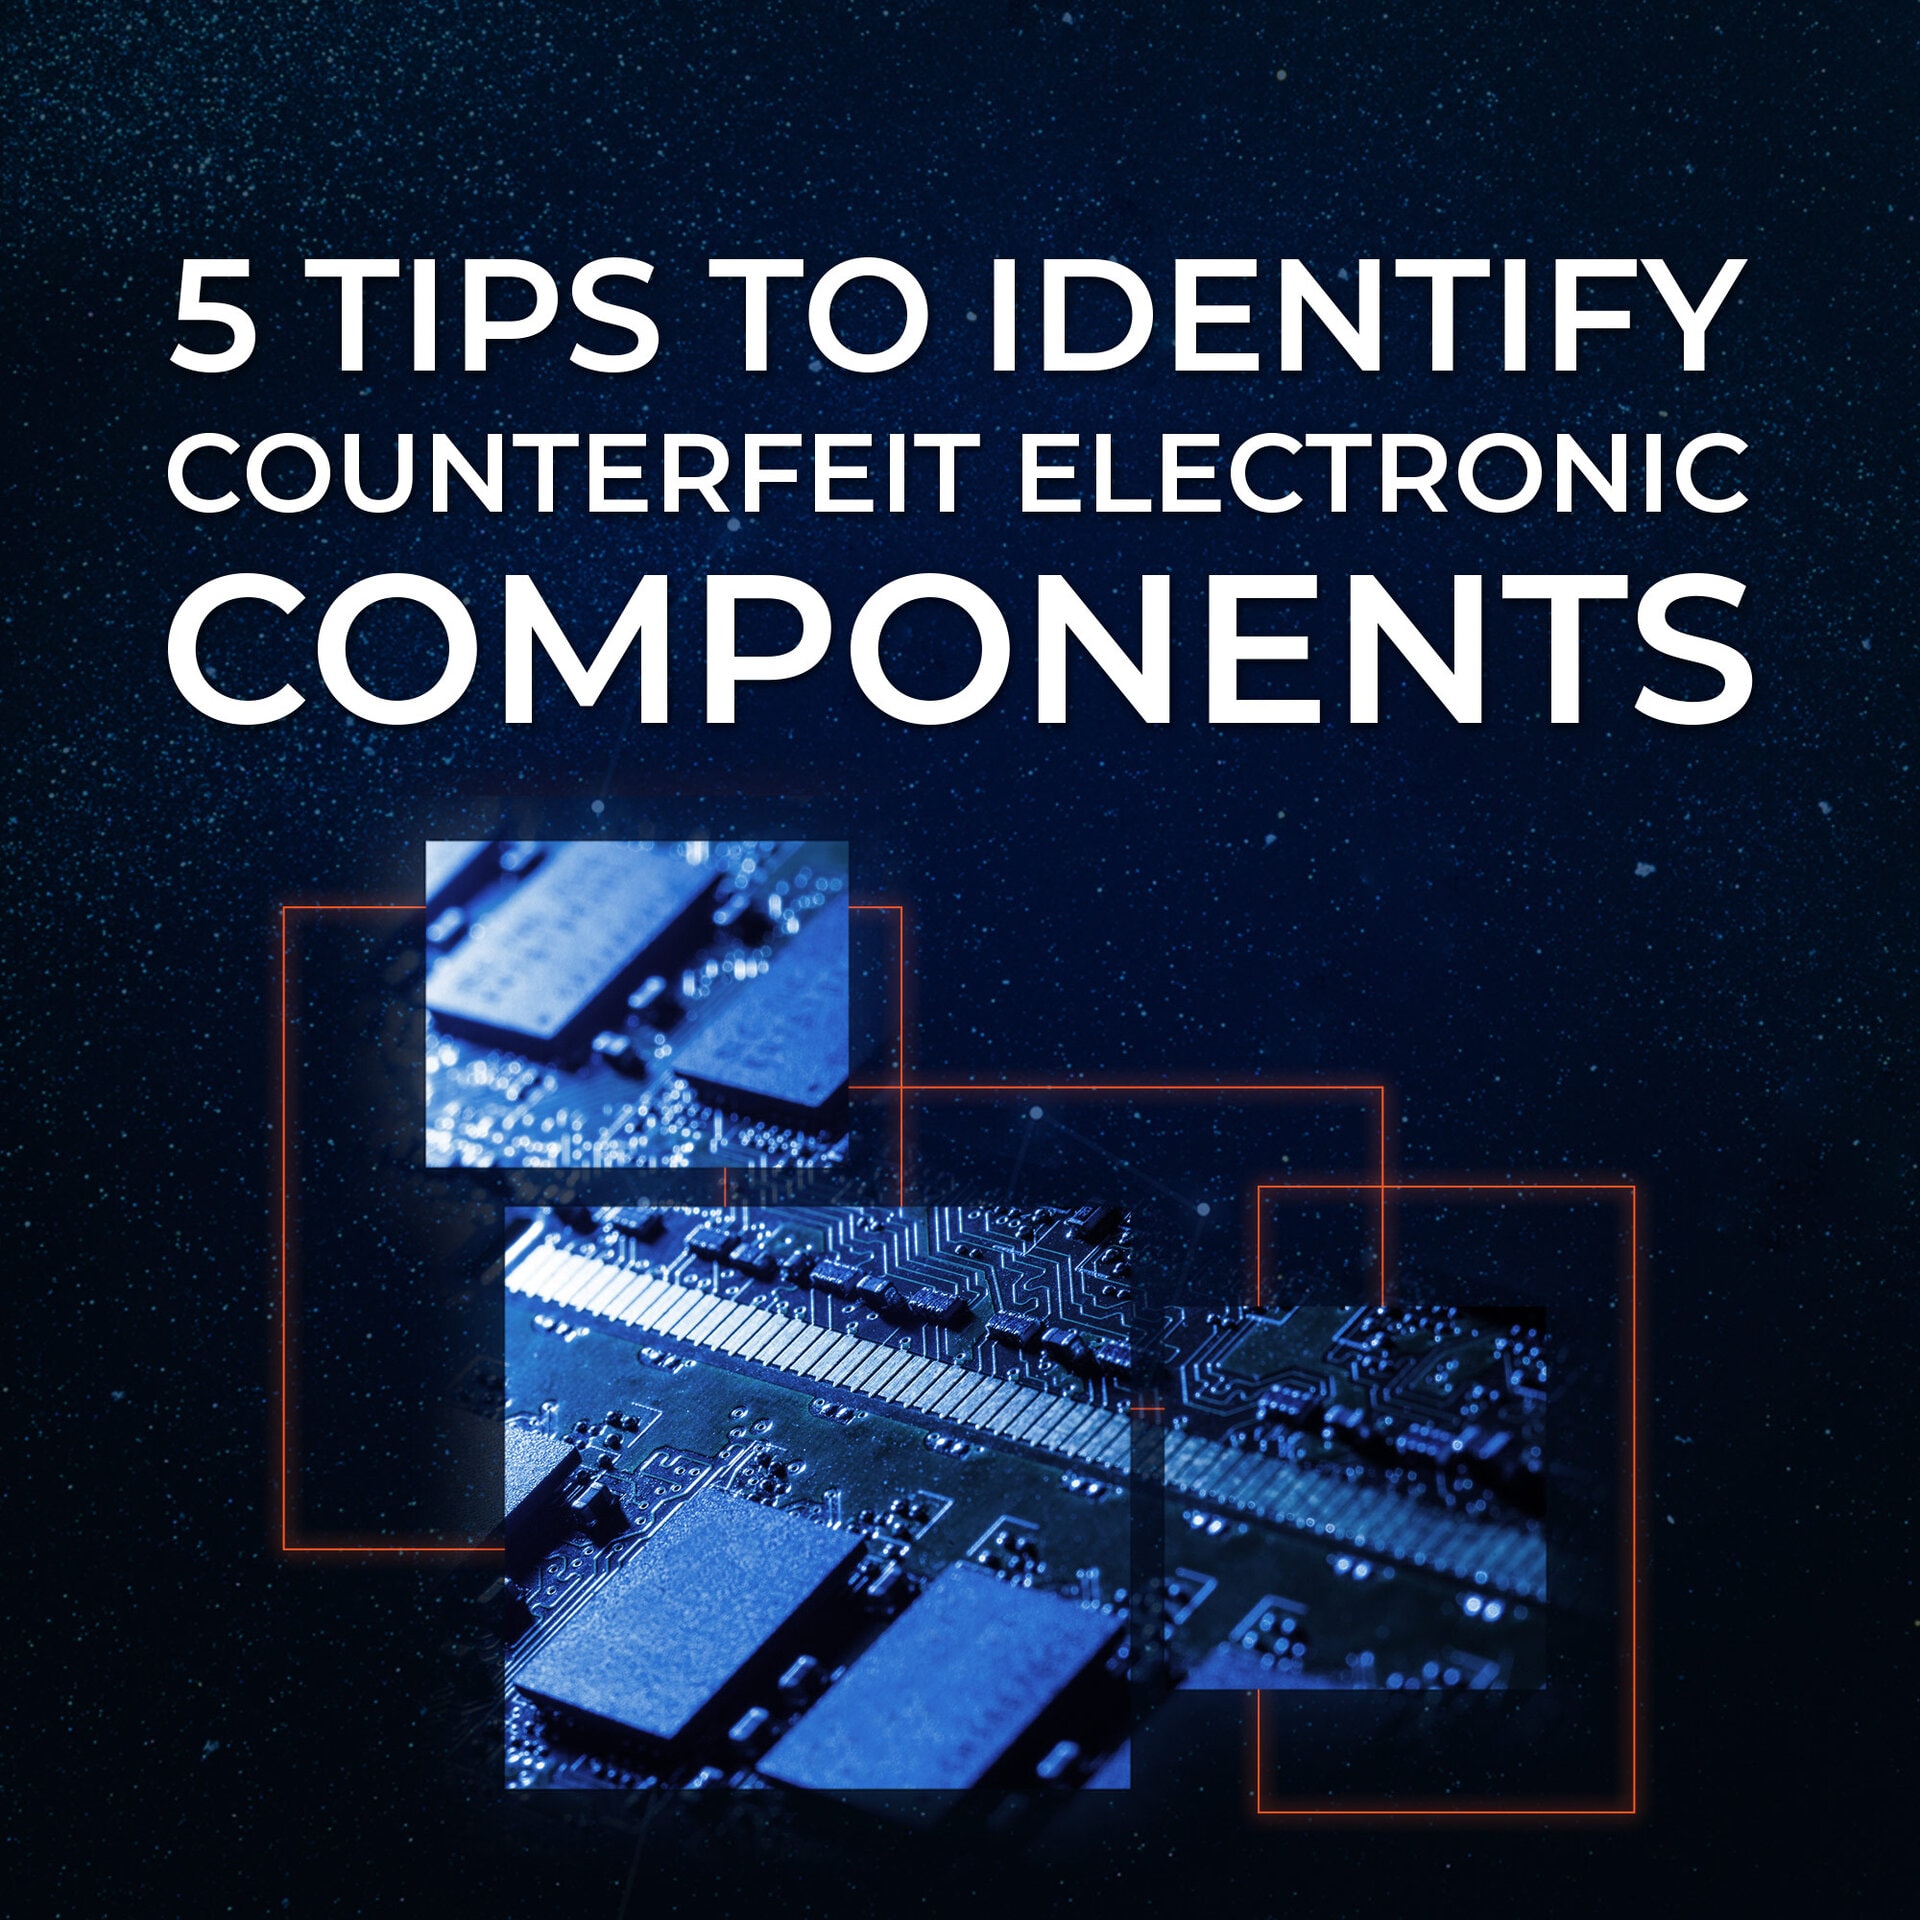 5 Ways to Outsmart the Counterfeiters: Identifying Fake Electronic Components